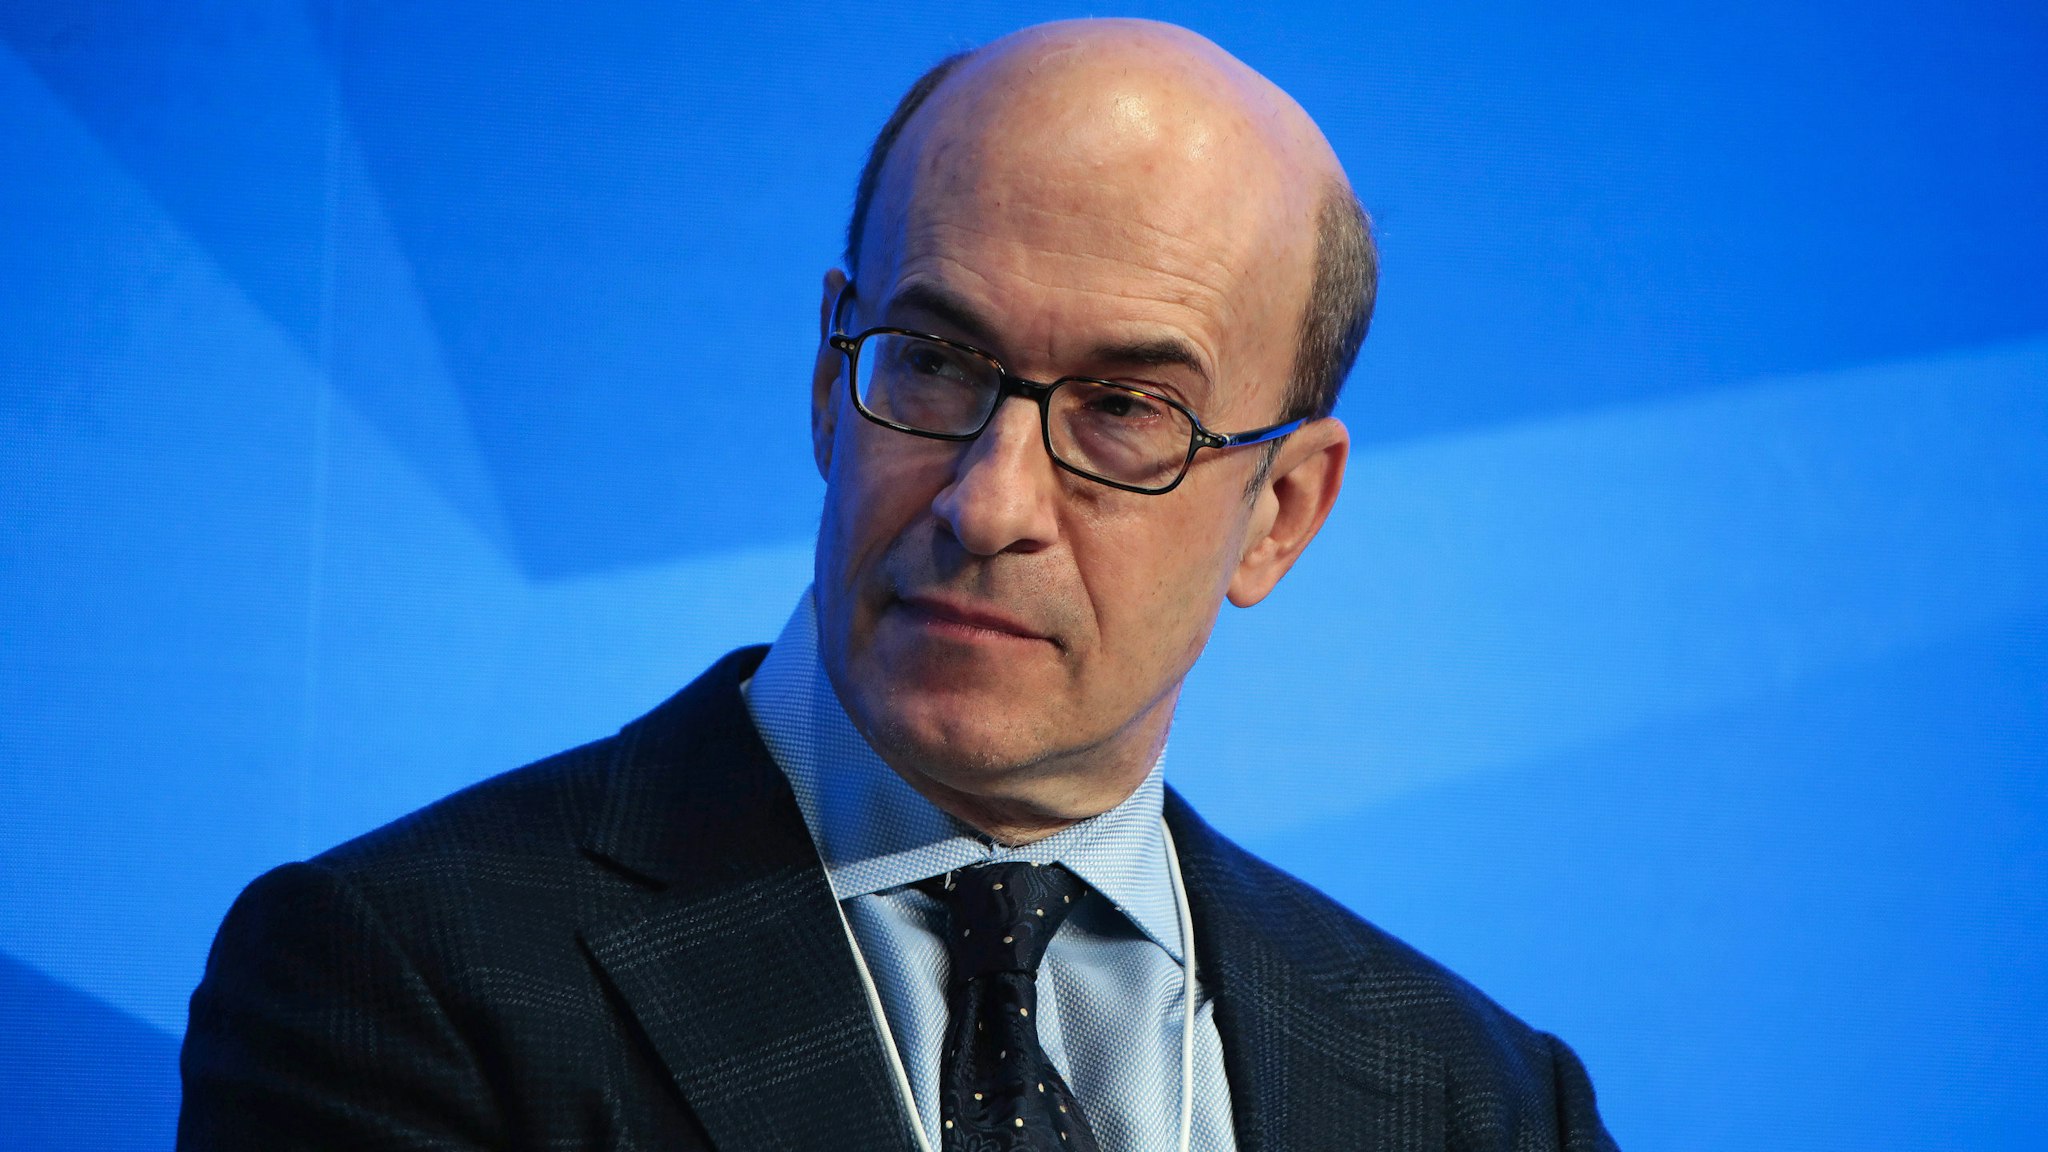 Kenneth Rogoff, professor of economics at Harvard University, looks on during a panel session at the World Economic Forum (WEF) in Davos, Switzerland, on Tuesday, Jan. 17, 2017. World leaders, influential executives, bankers and policy makers attend the 47th annual meeting of the World Economic Forum in Davos from Jan. 17 - 20.